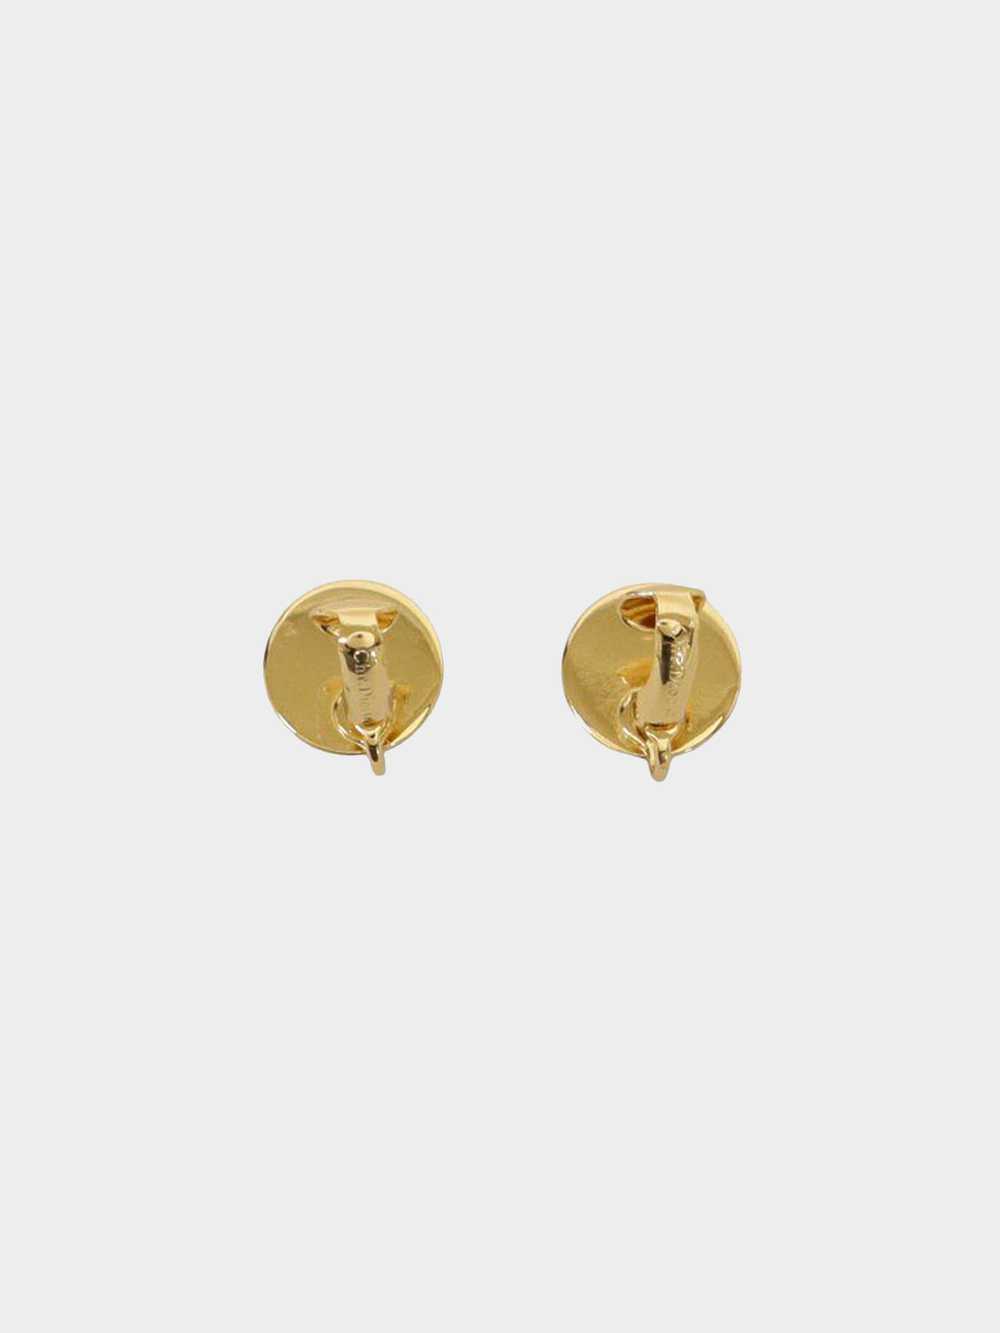 Christian Dior 1990s Round Clip-On Earrings - image 2